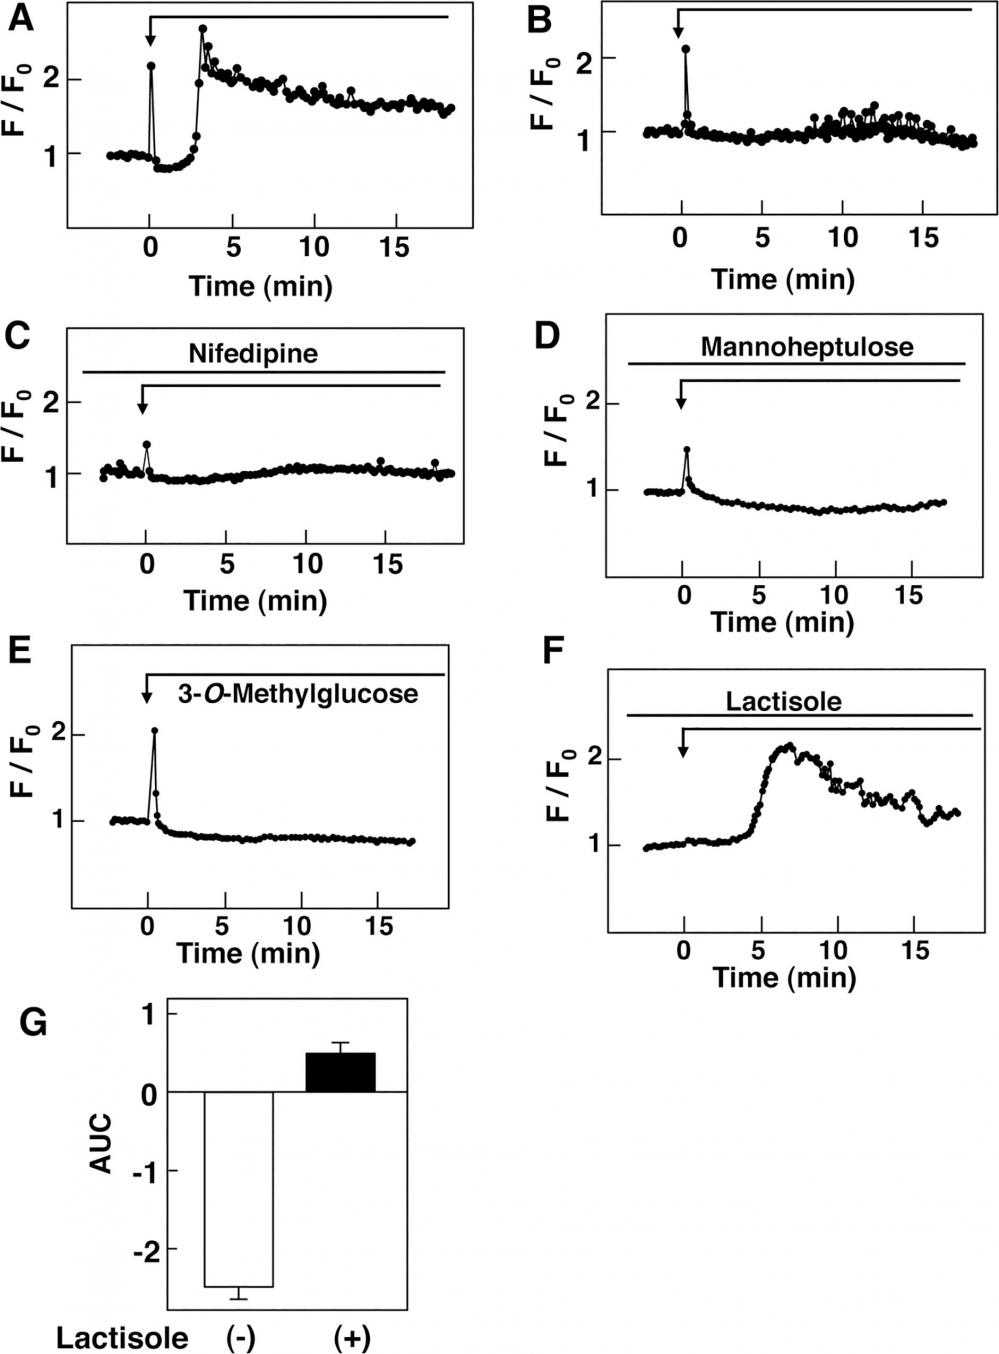 Effect of Glucose and 3-O-Methylglucose on [Ca2+]c Measured by Fluo-8. A: Fluo-8-loaded cells were stimulated by 25 mM glucose and changes in [Ca2+]c were measured. A typical response with a rapid peak is presented. The trace is a respresentative of those-obtained in more than 100 cells. B: Fluo-8-loaded cells were incubated in Ca2+-free HBSS and stimulated by 25 mM glucose as shown by the arrow. The trace is a representative of those obtained in more than 100 cells. C: Fluo-8-loaded cells were stimulated by 25 mM glucose in the presence of 1 &mu;M nifedipine, which was added 10 min pror to the stimulation by glucose. Changes in [Ca2+]c were monitored. The trace is a representative of those obtained in more than 100 cells. D: Fluo-8-loaded cells preincubated for 10 min with 10 mM mannoheptulose were stimulated with 25 mM glucose as indicated by the arrow. The trace is a representative of those obtained in more than 100 cells. E: Fluo-8-loaded cells were stimulated by 25 mM 3-O-methylglucose and changes in [Ca2+]c were monitored. The trace is a representative of those obtained in more than 100 cells. F: Fluo-8-loaded cells were stimulated by 25 mM glucose in the presence of 5 mM lactisole, which was added 10 min prior to the stimulation by glucose. Changes in [Ca2+]c were monitored. The trace is a representative of those obtained in more than 100 cells. G: Experiments were carried out as shown in F and AUC from 1 to 5 min was calculated. Values are the mean &plusmn; SE for 10 determinations. Source: <em>Graph from&nbsp;Glucose Evokes Rapid Ca2+ and Cyclic AMP Signals</em> <em>by Activating the Cell-Surface Glucose-Sensing Receptor in Pancreatic &beta;-Cells</em> by Yuko Nakagawa et al. PLOS, Dec. 2015.